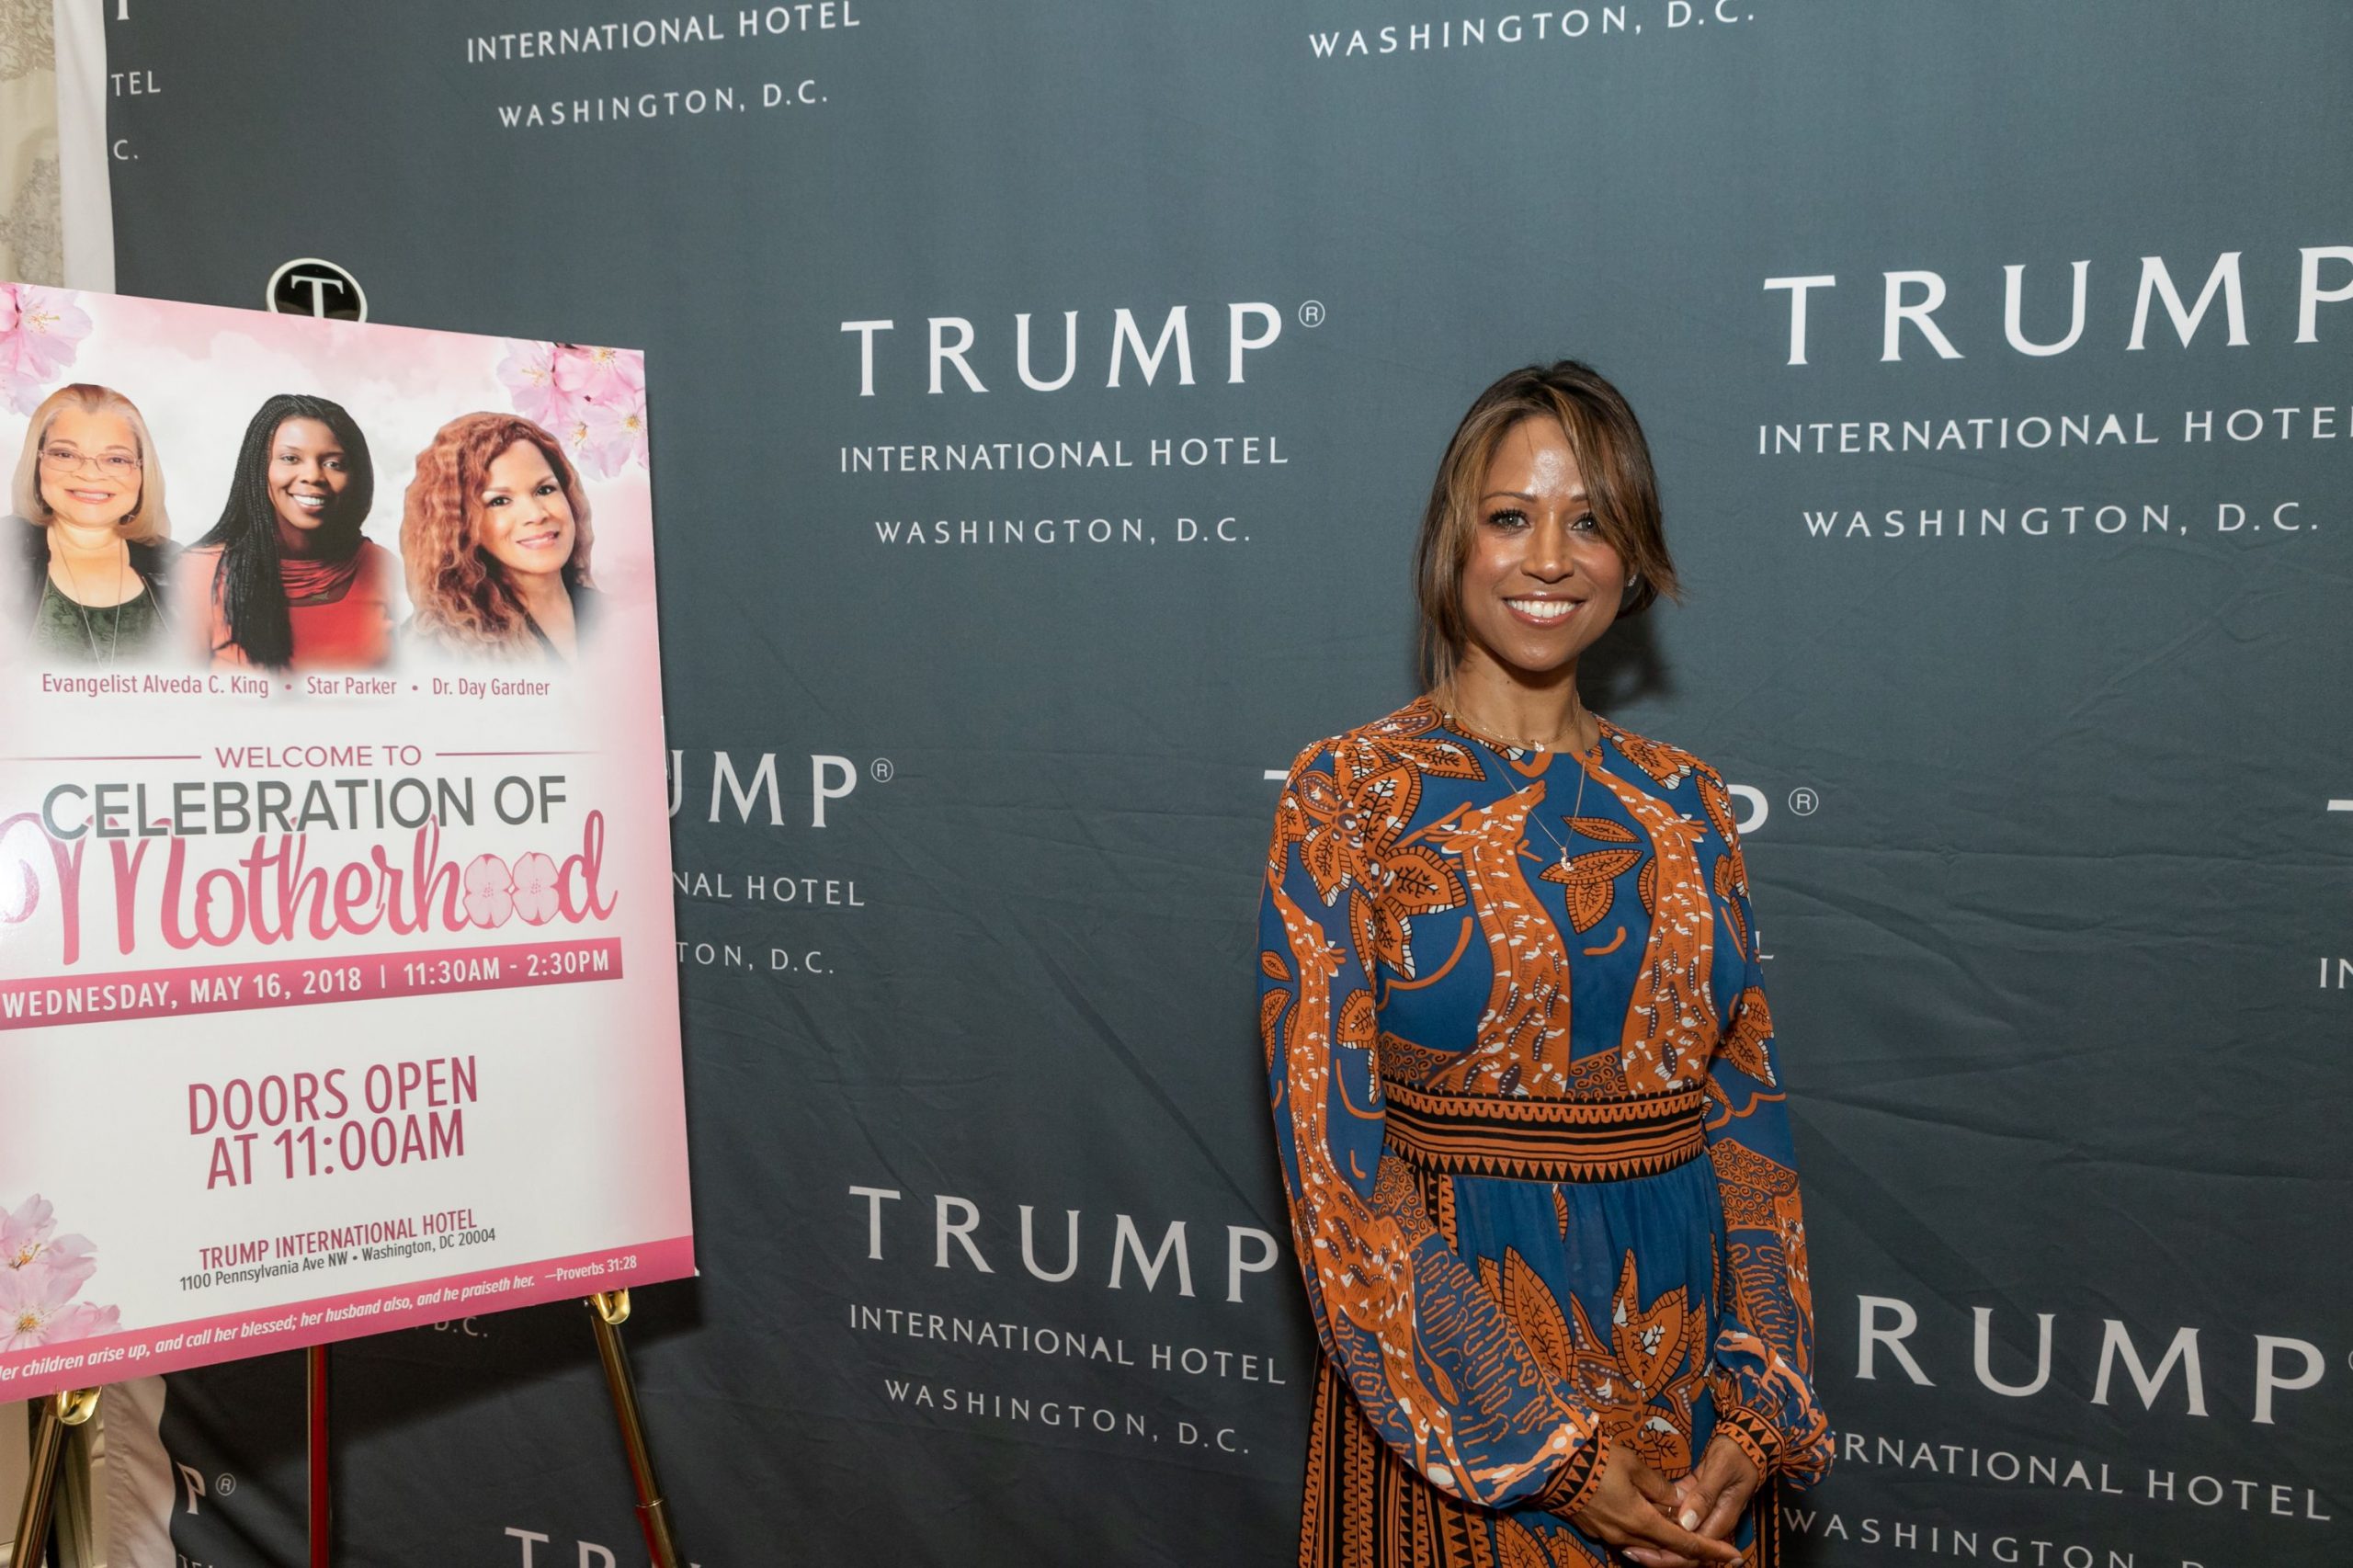 Actress Stacey Dash at a luncheon in Celebration of Motherhood, with keynote speaker Mrs. Candy Carson, at Trump International Hotel in Washington, D.C., on Wednesday, May 16, 2018 | Photo: Getty Images